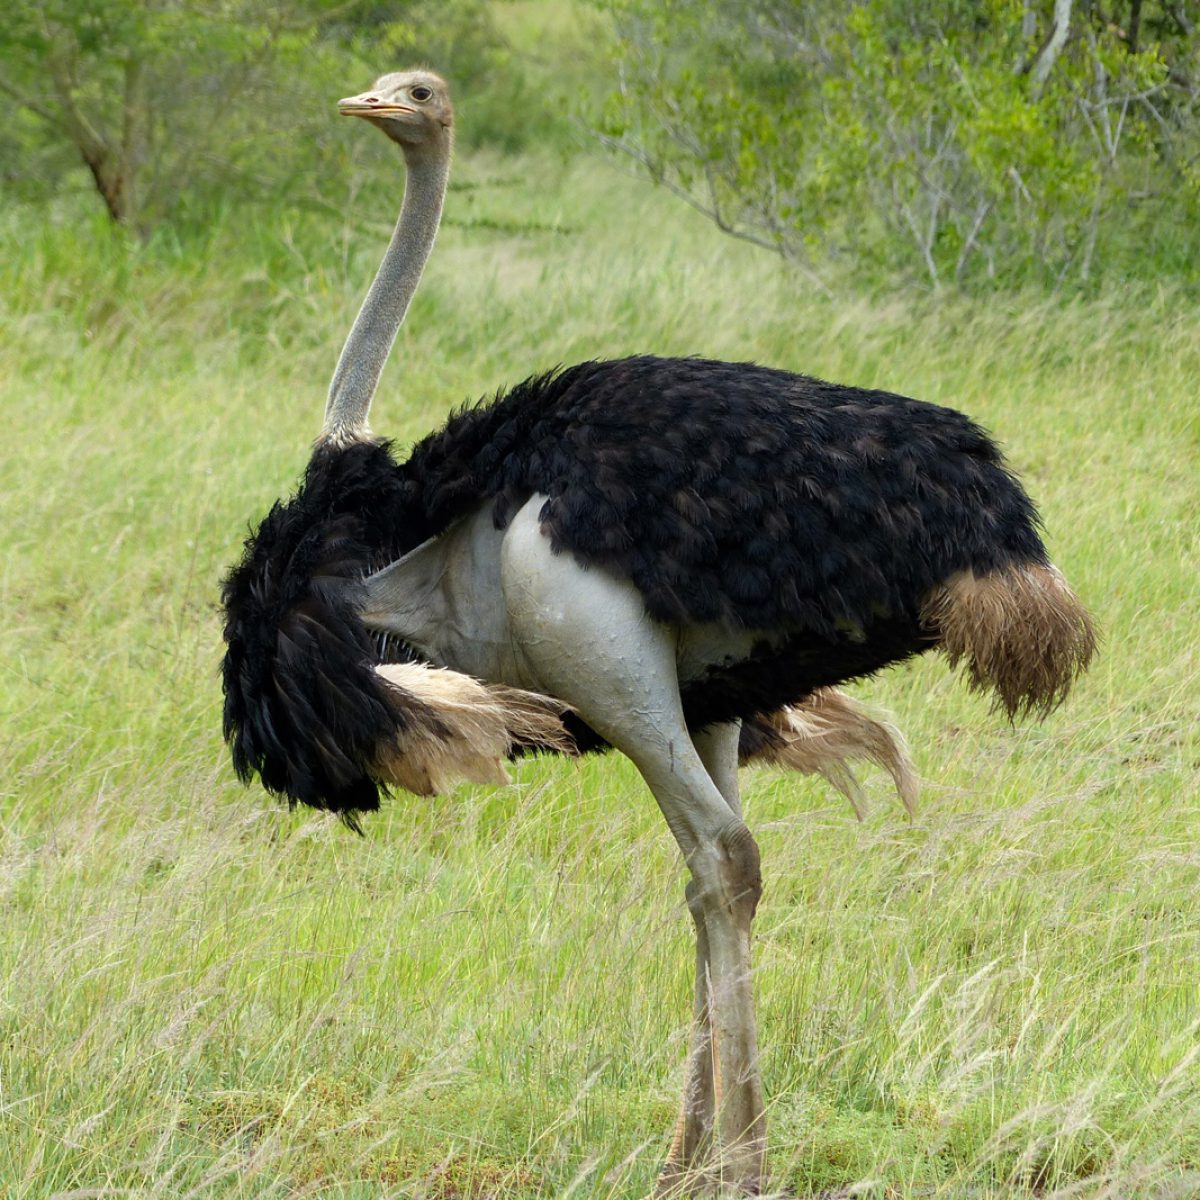 Ostrich. Photo credit: Bernard Dupont. https://commons.wikimedia.org/wiki/File:Ostrich_(Struthio_camelus)_male_(13994461256).jpg